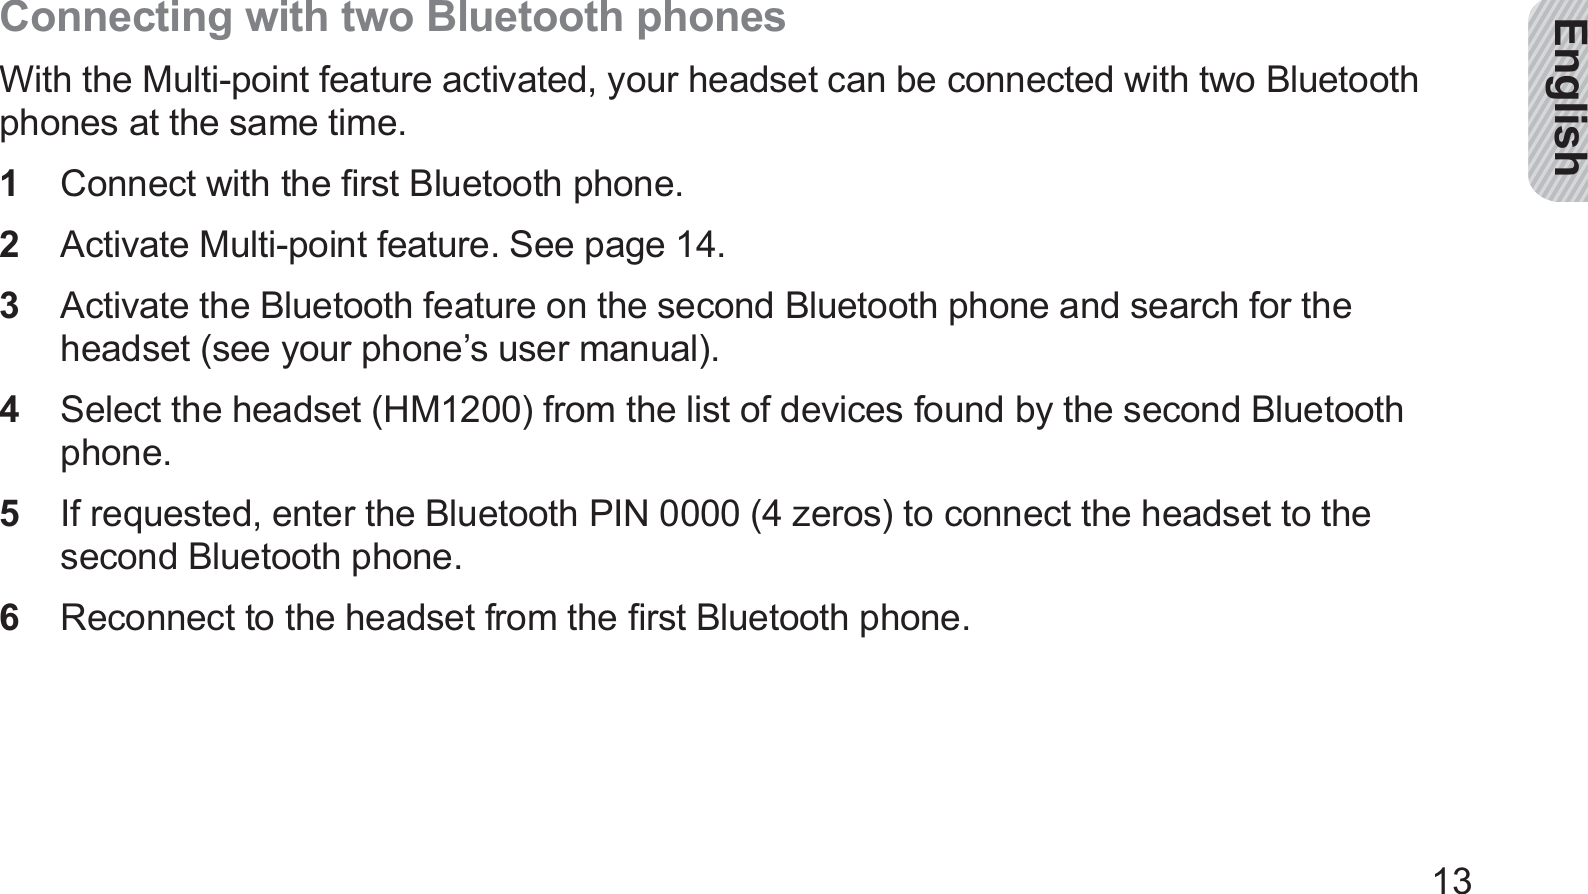 English13Connecting with two Bluetooth phonesWith the Multi-point feature activated, your headset can be connected with two Bluetooth phones at the same time.Connect with the ﬁrst Bluetooth phone.1 Activate Multi-point feature. See page 2  14.Activate the Bluetooth feature on the second Bluetooth phone and search for the 3 headset (see your phone’s user manual).Select the headset (HM1200) from the list of devices found by the second Bluetooth 4 phone.If requested, enter the Bluetooth PIN 0000 (4 zeros) to connect the headset to the 5 second Bluetooth phone.Reconnect to the headset from the ﬁrst Bluetooth phone.6 